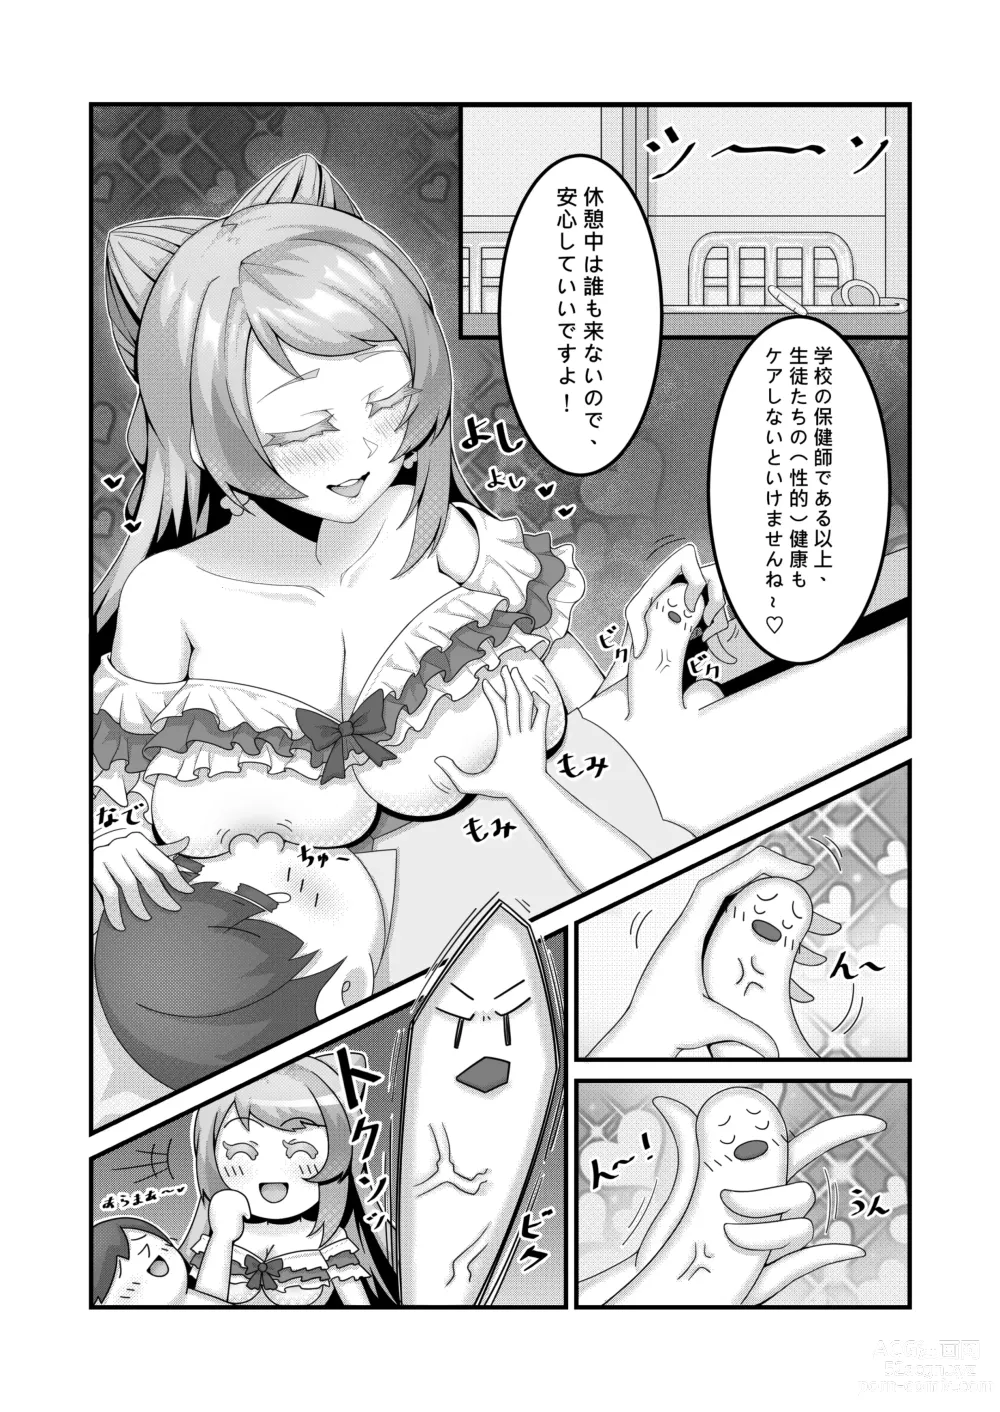 Page 6 of doujinshi Sex after Versus？ - ミモザ & キハダ